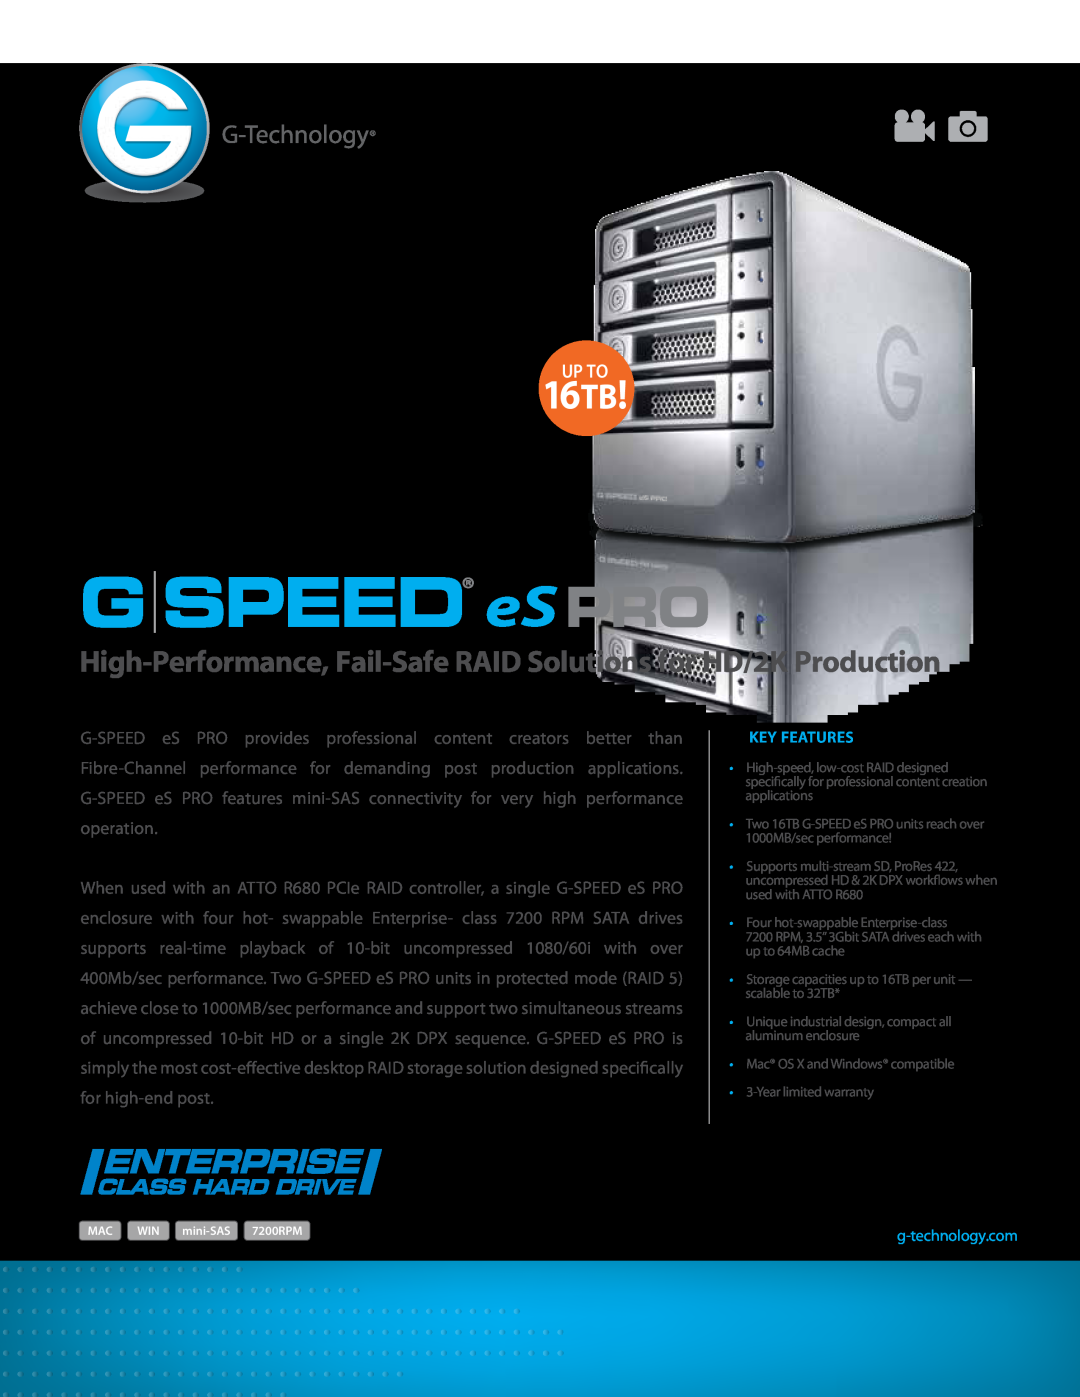 G-Technology 0G01873 warranty G SPEED eS PRO, 16TB, High-Performance, Fail-Safe RAID Solutions for HD/2K Production, Up To 